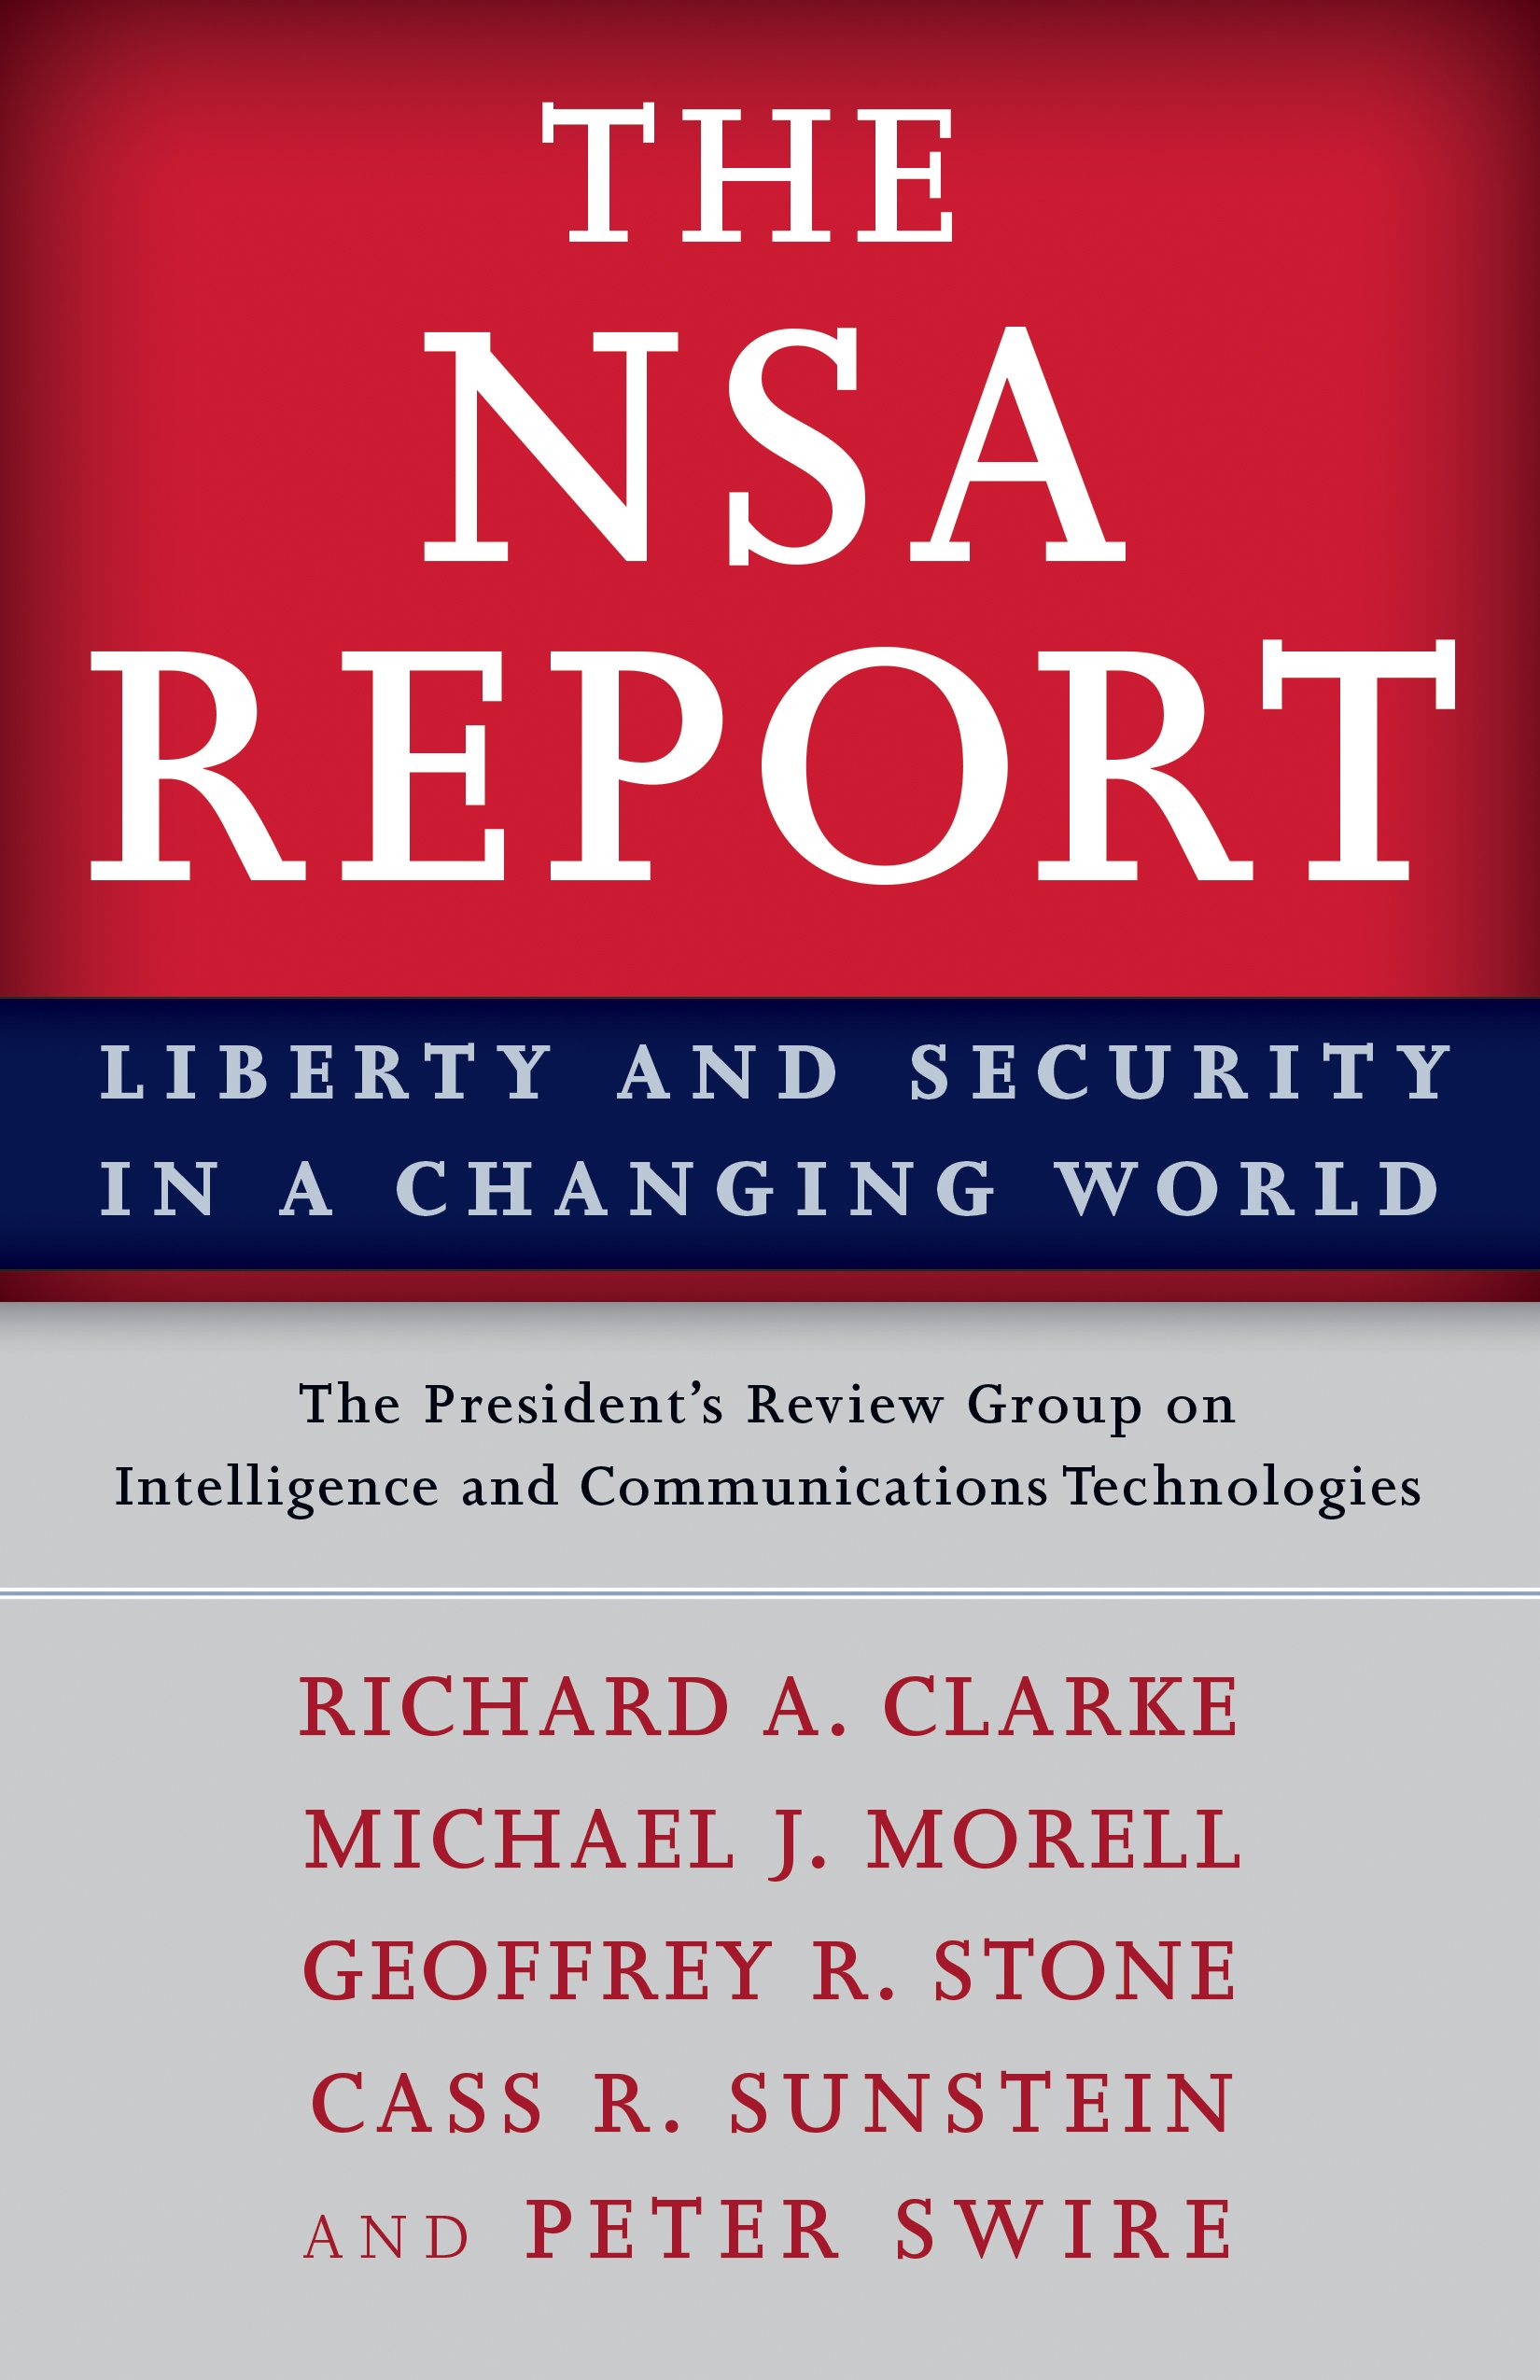 The NSA Report book cover - liberty and security in a changing world by Richard A Clarke